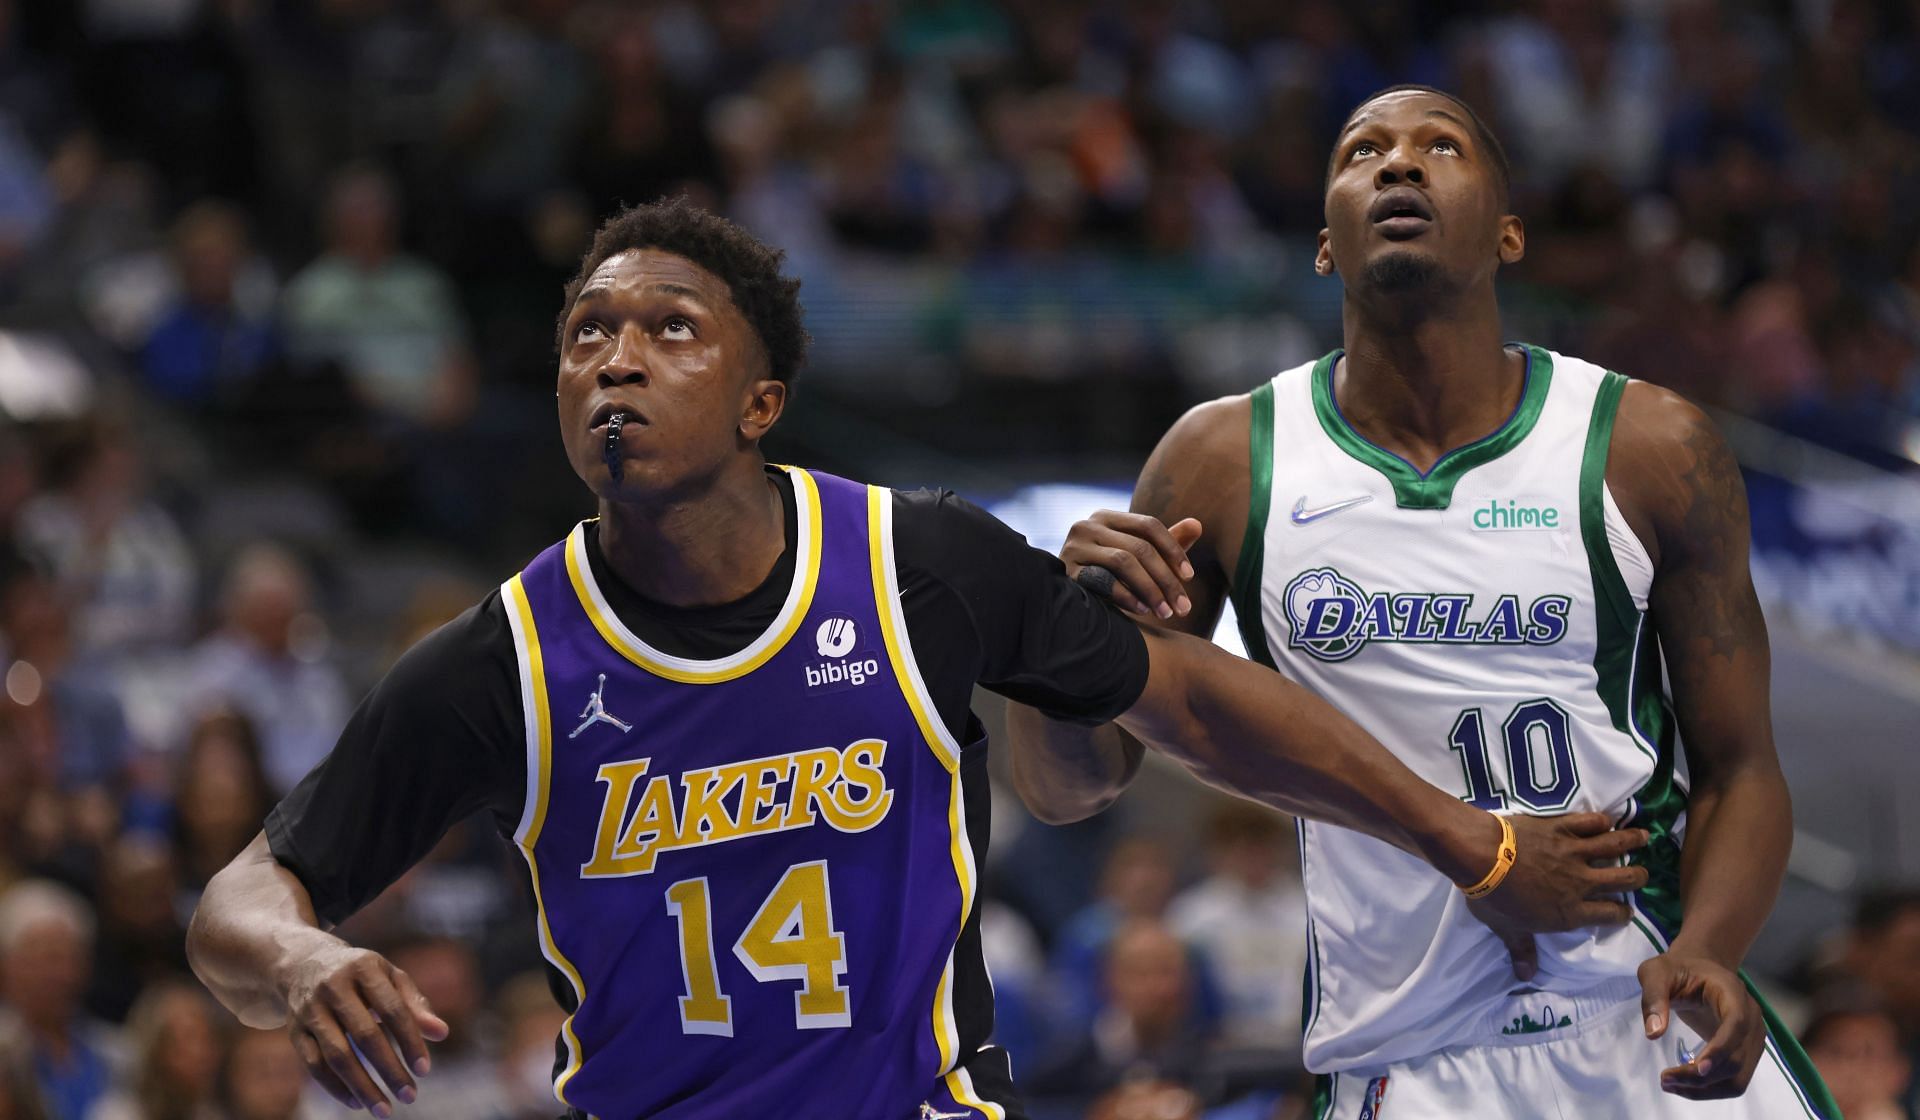 The LA Lakers suffered an 18-point loss to the Dallas Mavericks on Tuesday night